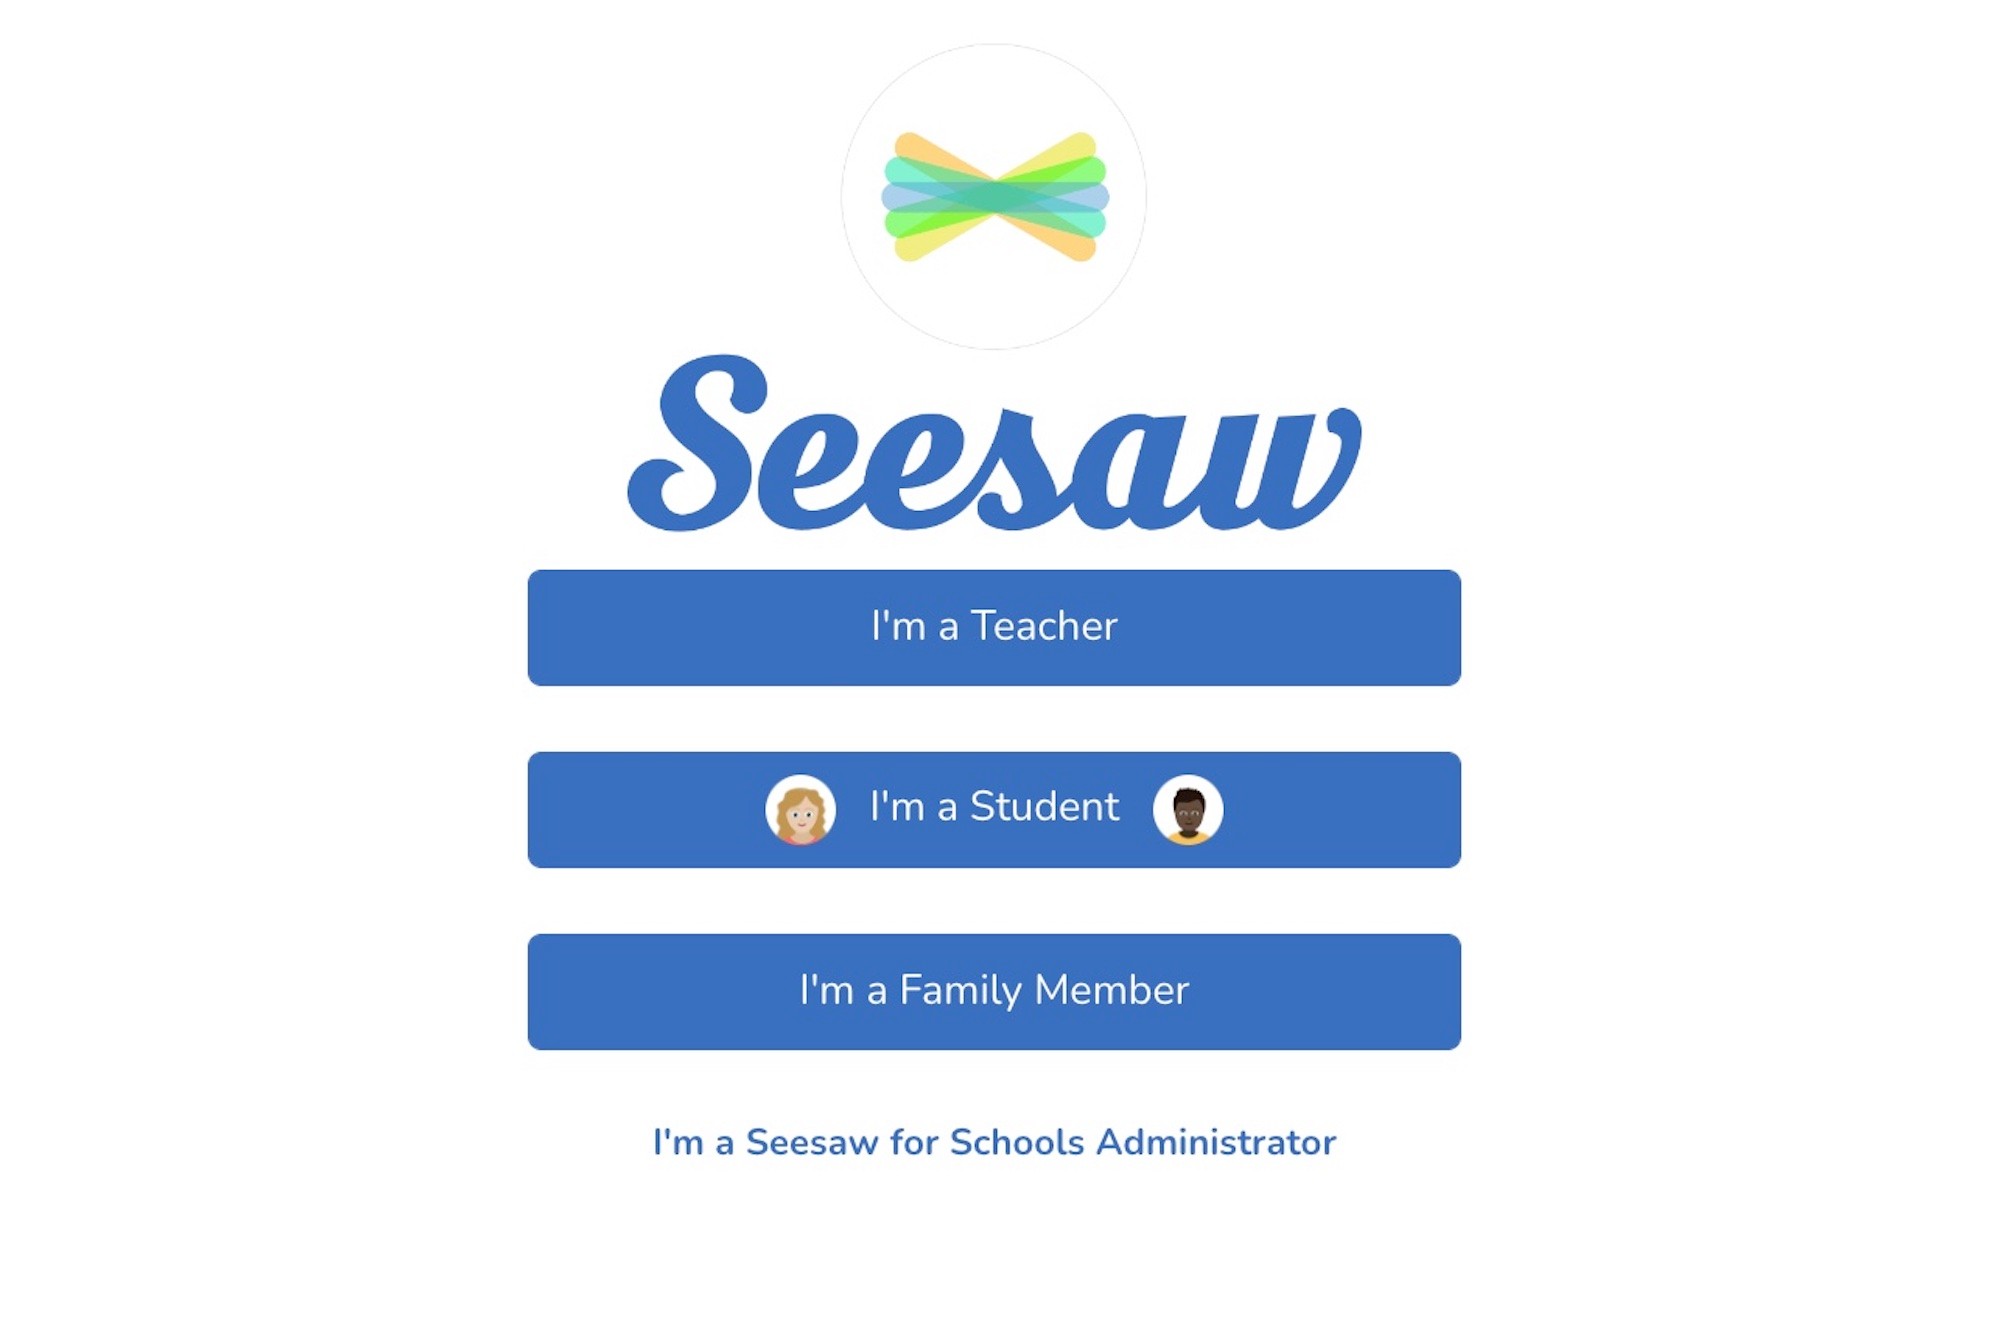 Teacher And Student Xvideo - Here's the Goatse Image Hackers Sent on the Seesaw Parent-Teacher Messaging  App at Schools Around the Country